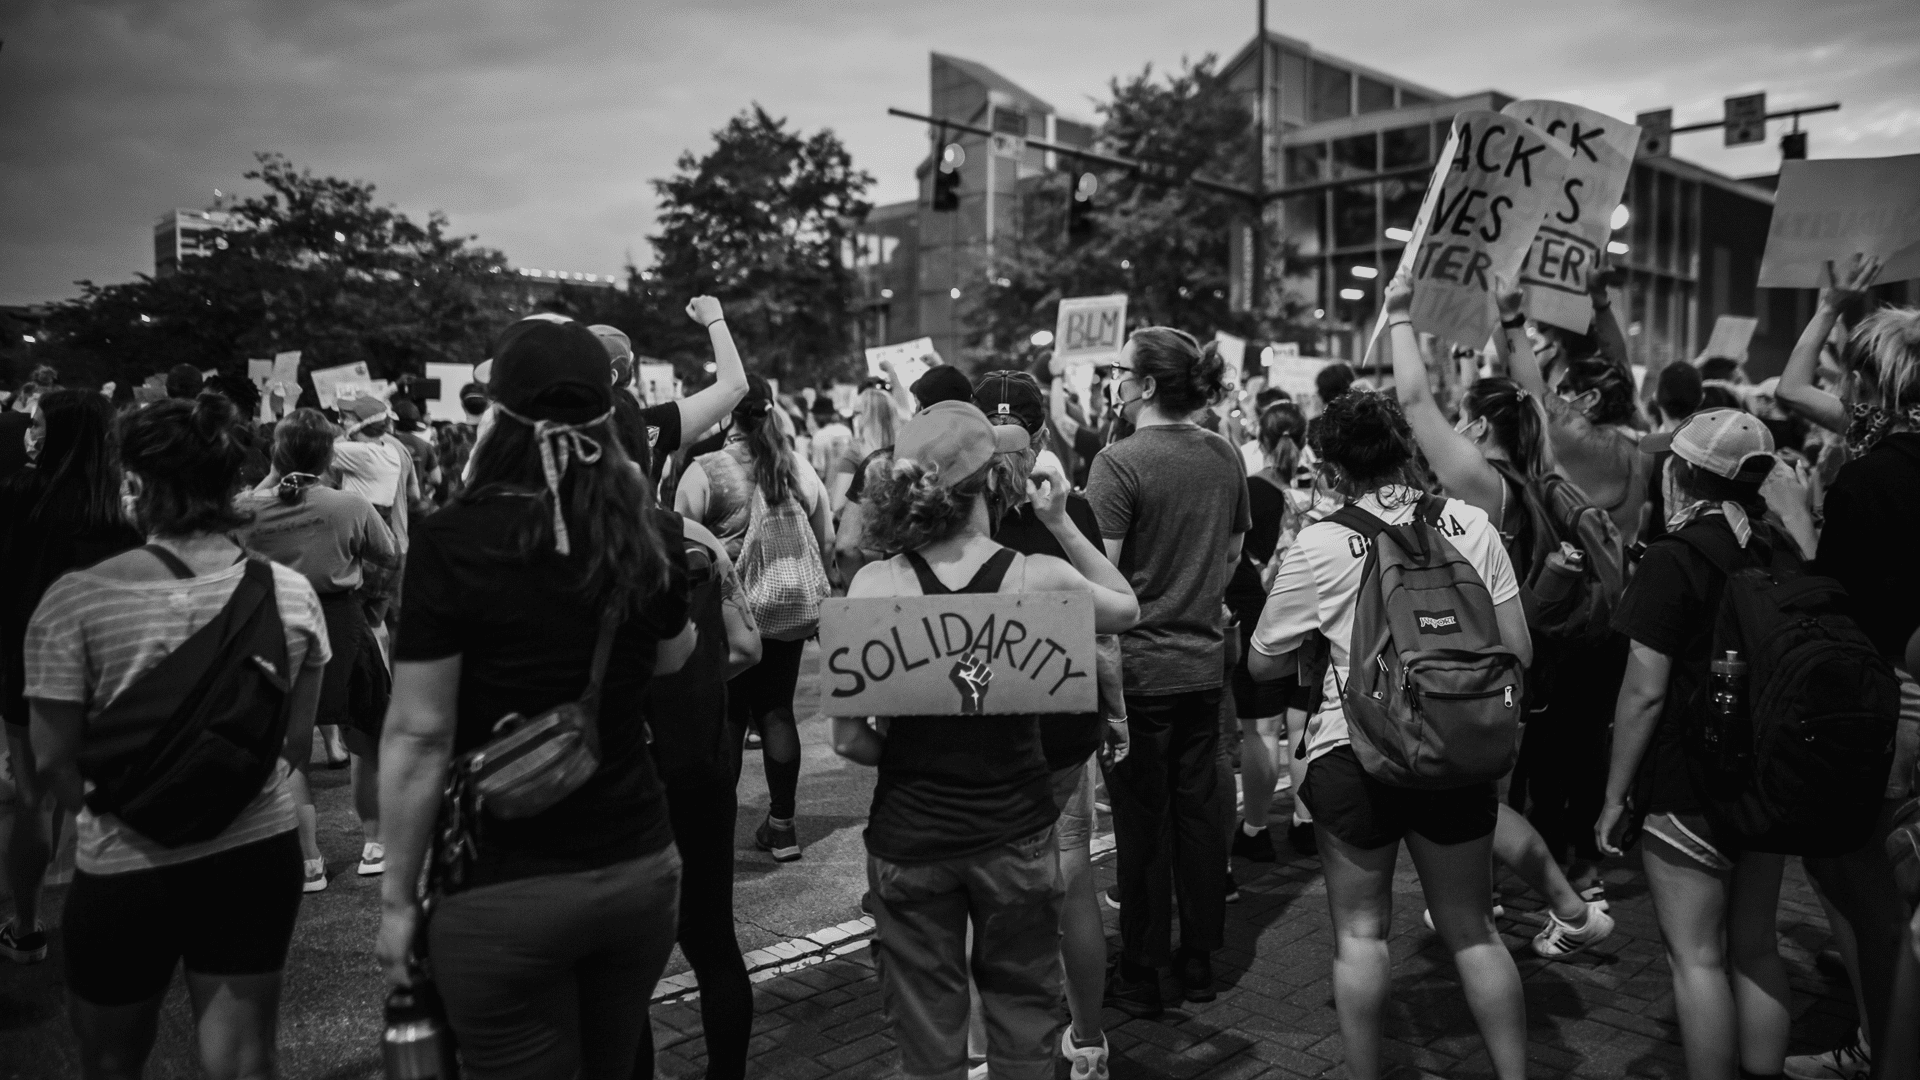 People gathered at a Black Lives Matter rally